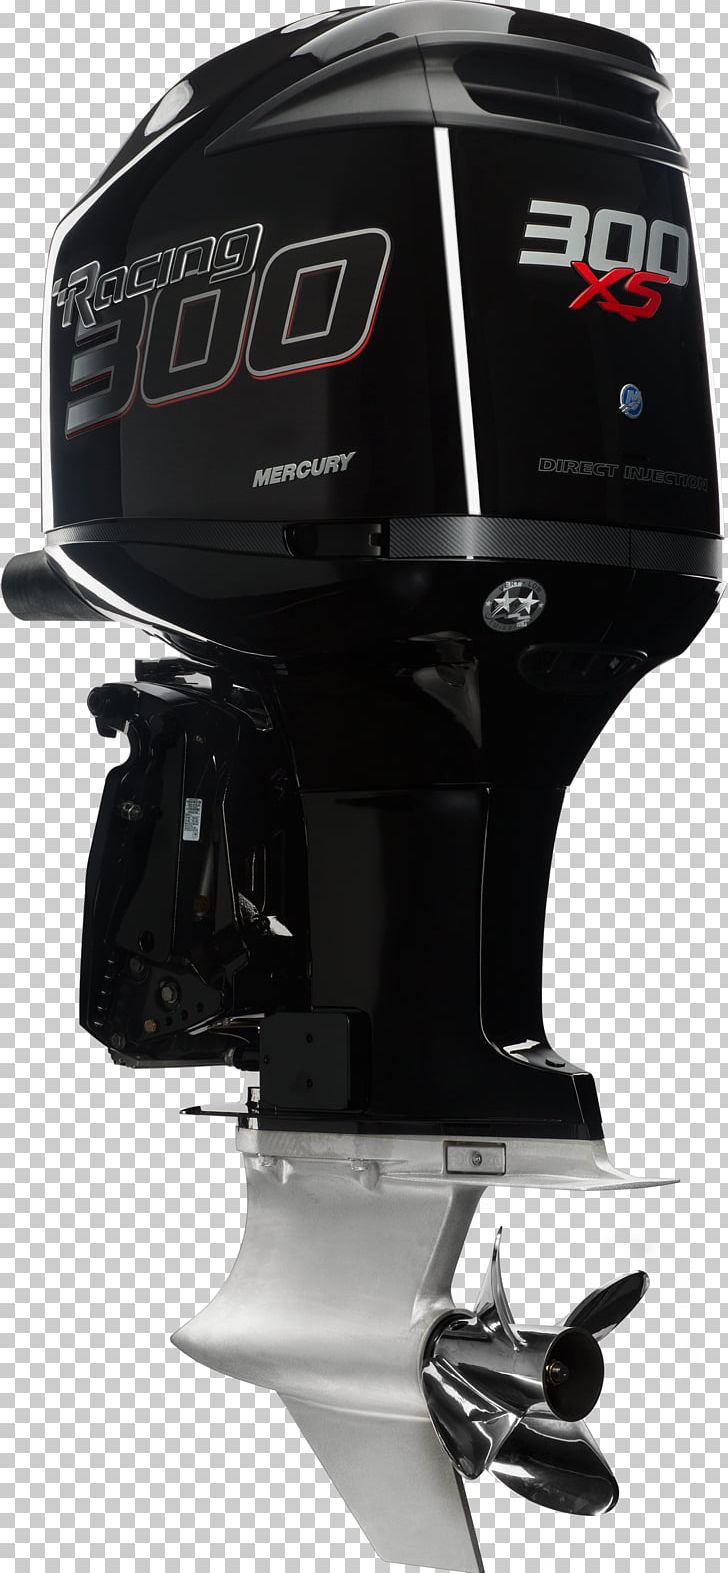 Outboard Motor Bicycle Helmets Mercury Marine Suzuki Honda Motor Company PNG, Clipart, Bicycle Helmet, Bicycle Helmets, Car, Engine, Motorcycle Helmet Free PNG Download